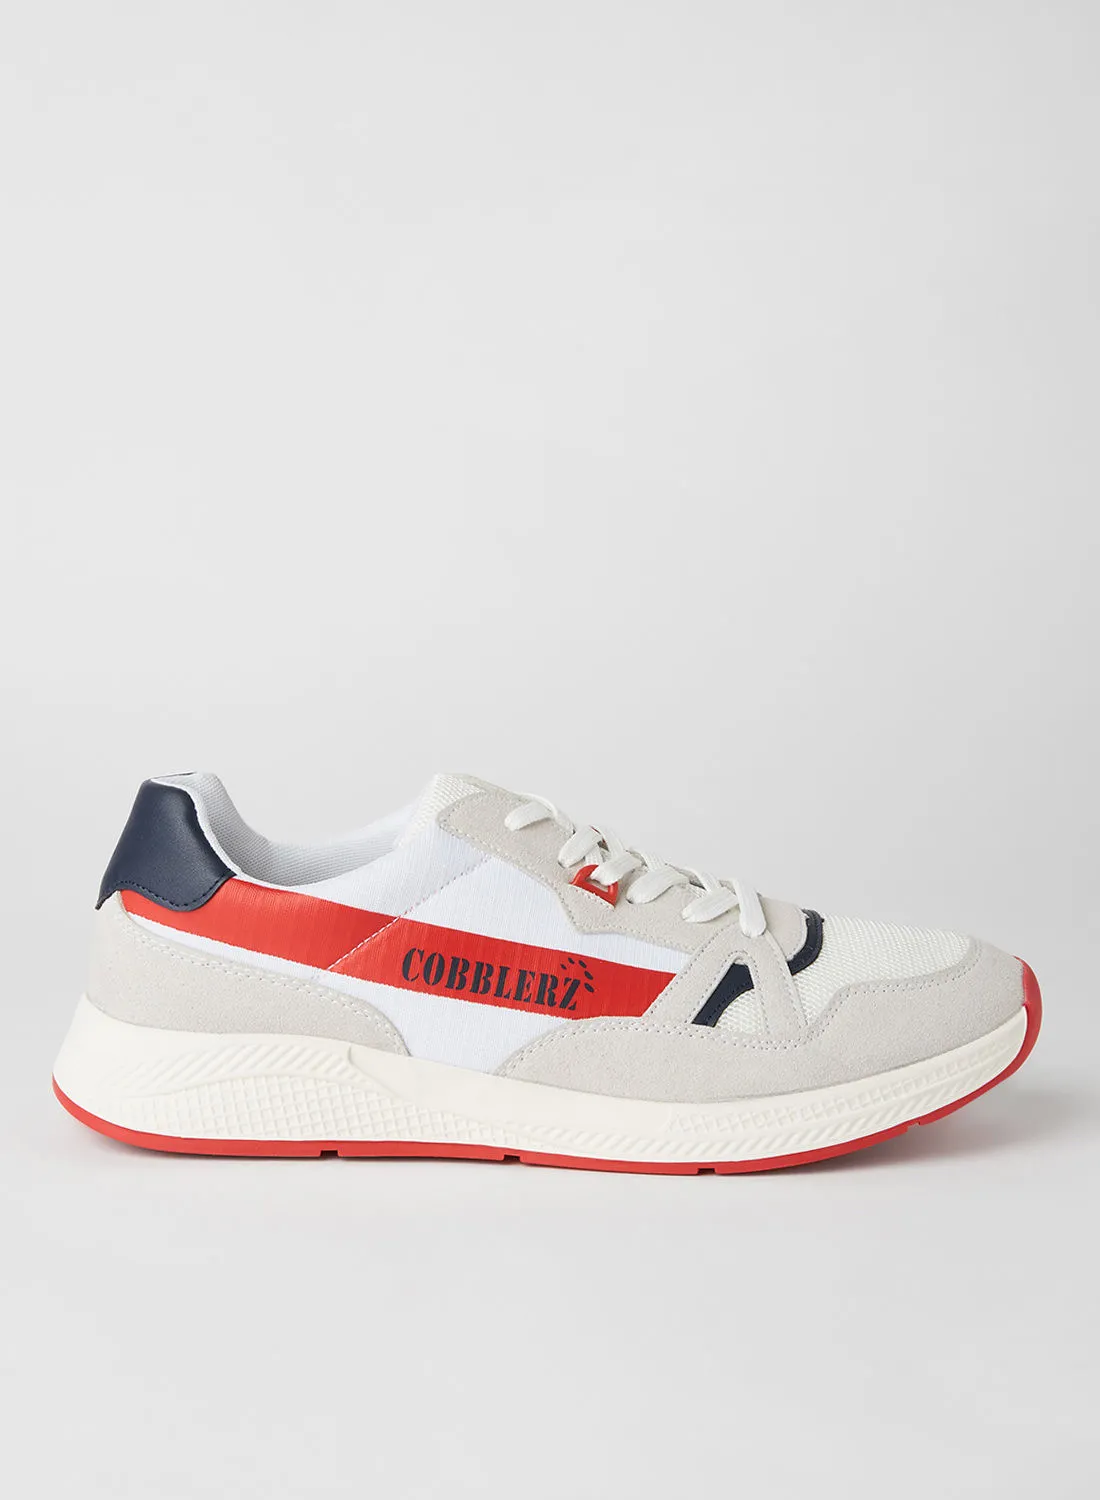 Cobblerz Contrast Overlay Sneakers White-Red